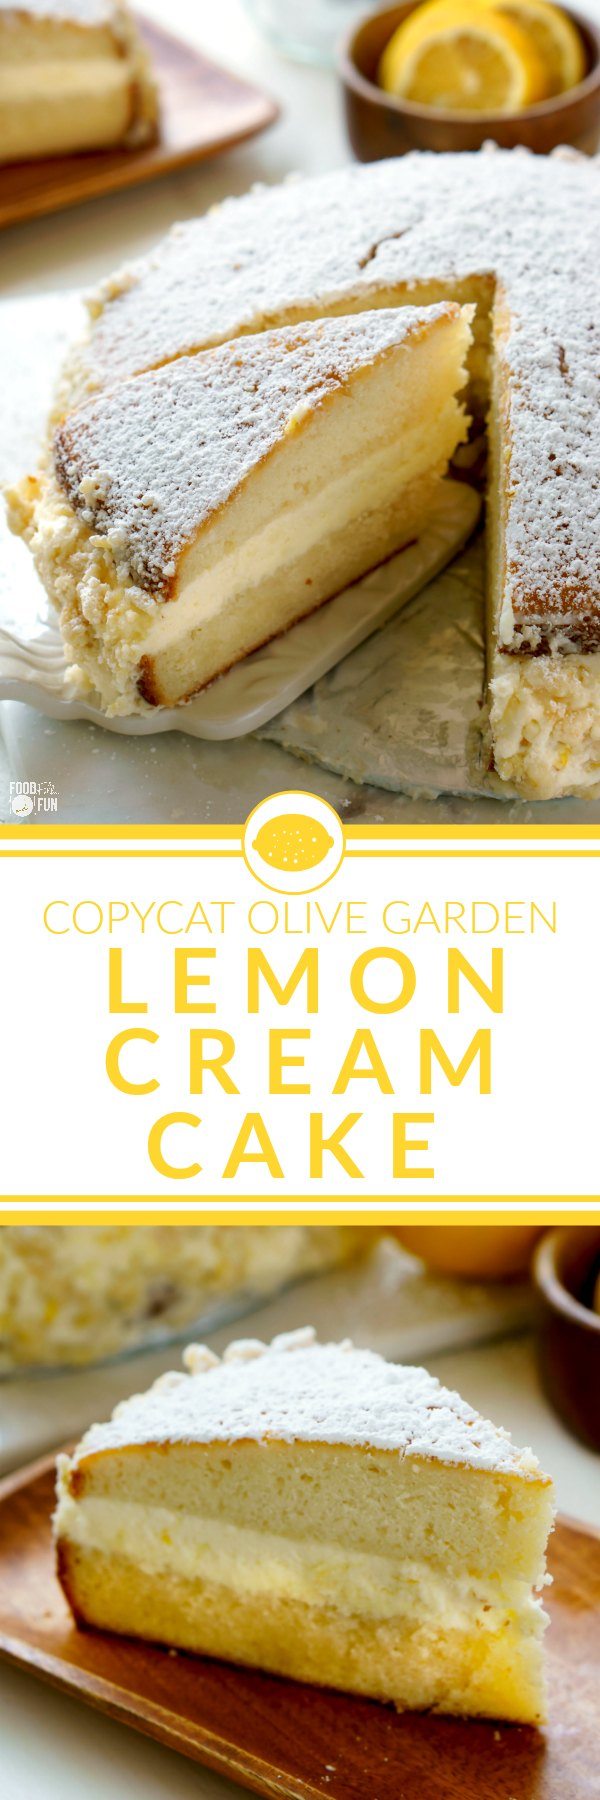 This Copycat Olive Garden Lemon Cream Cake is completely homemade, and is every bit as good as the original—and dare I say, even better! via @foodfolksandfun